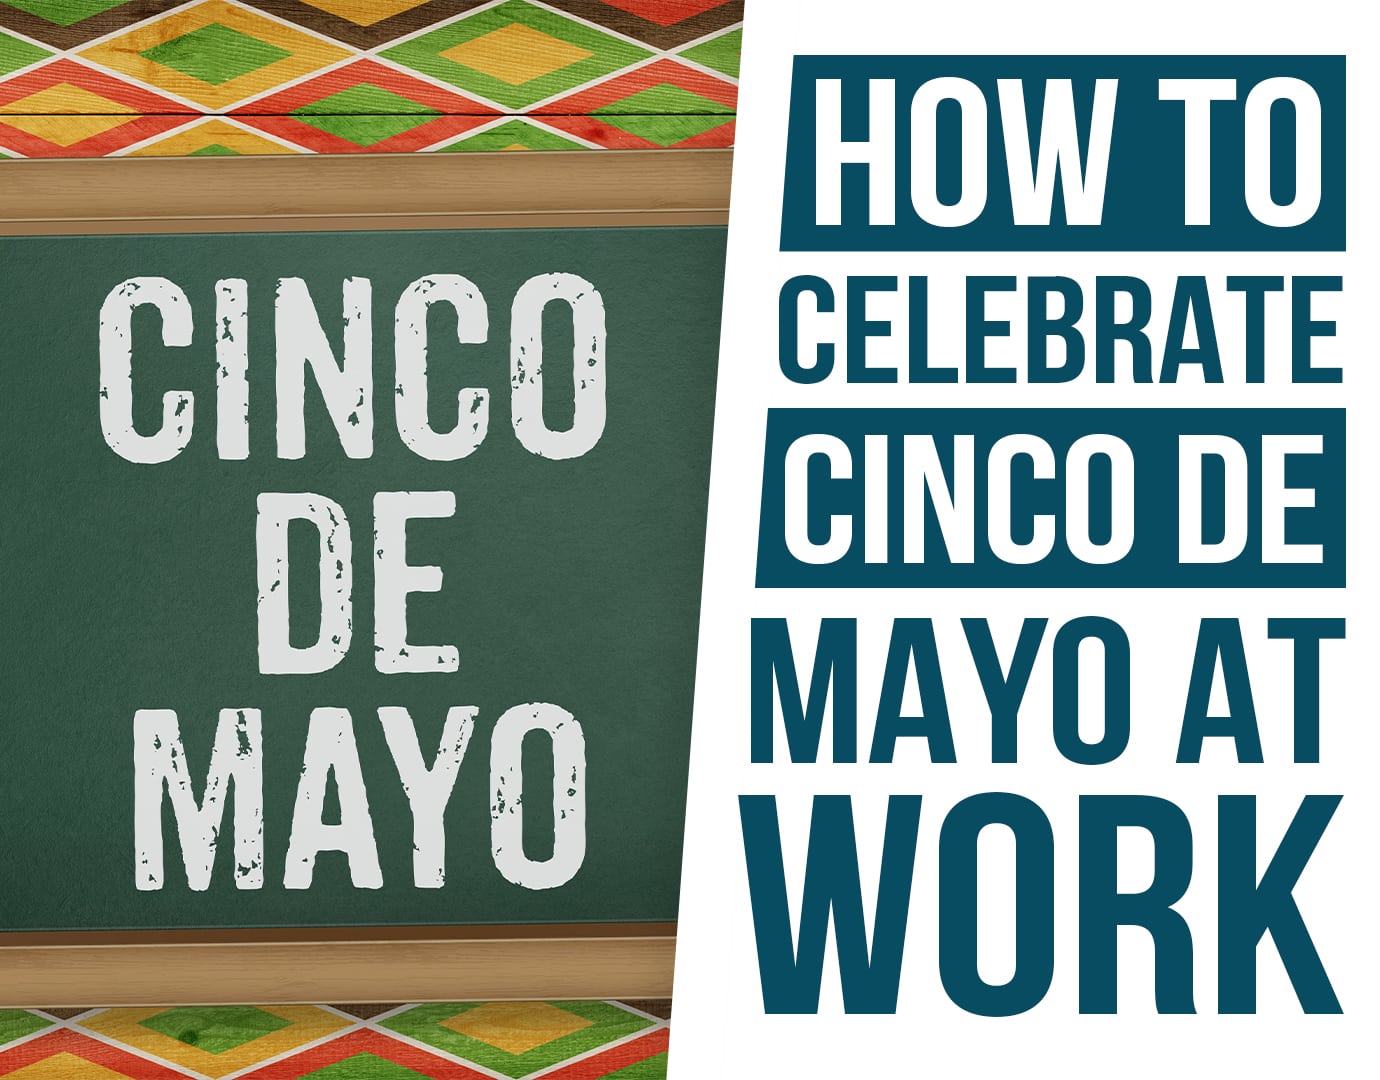 How to celebrate cinco de mayo at work